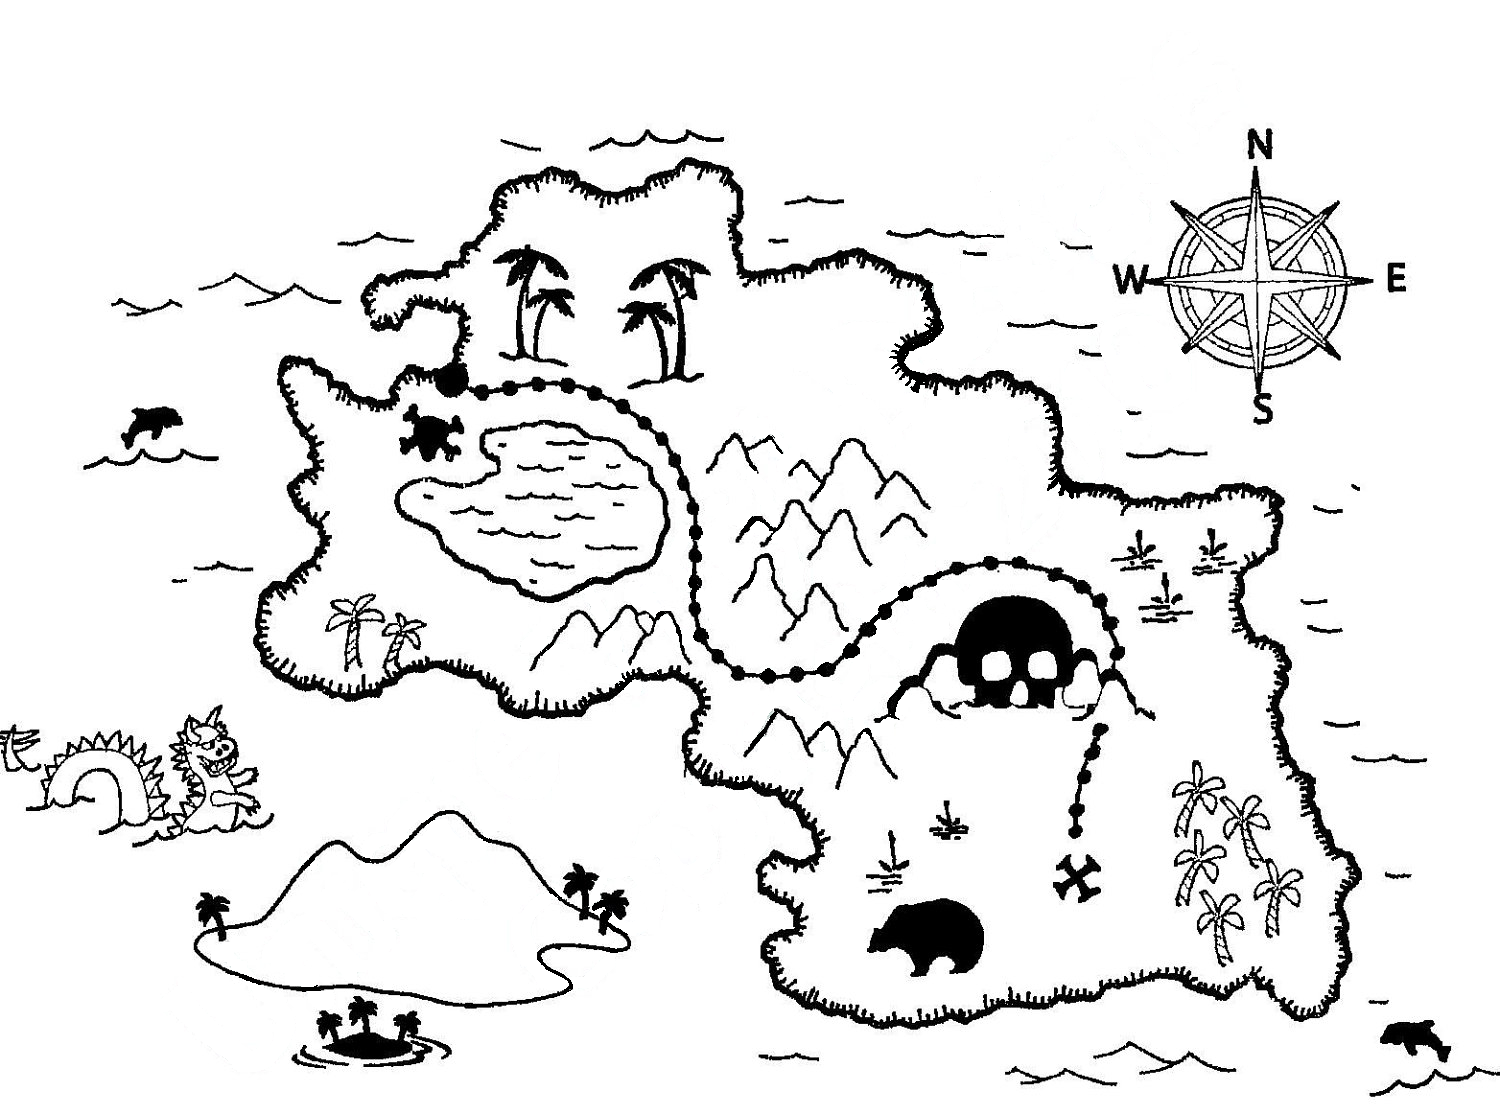 maps to color : Coloring - Download Coloring Pages